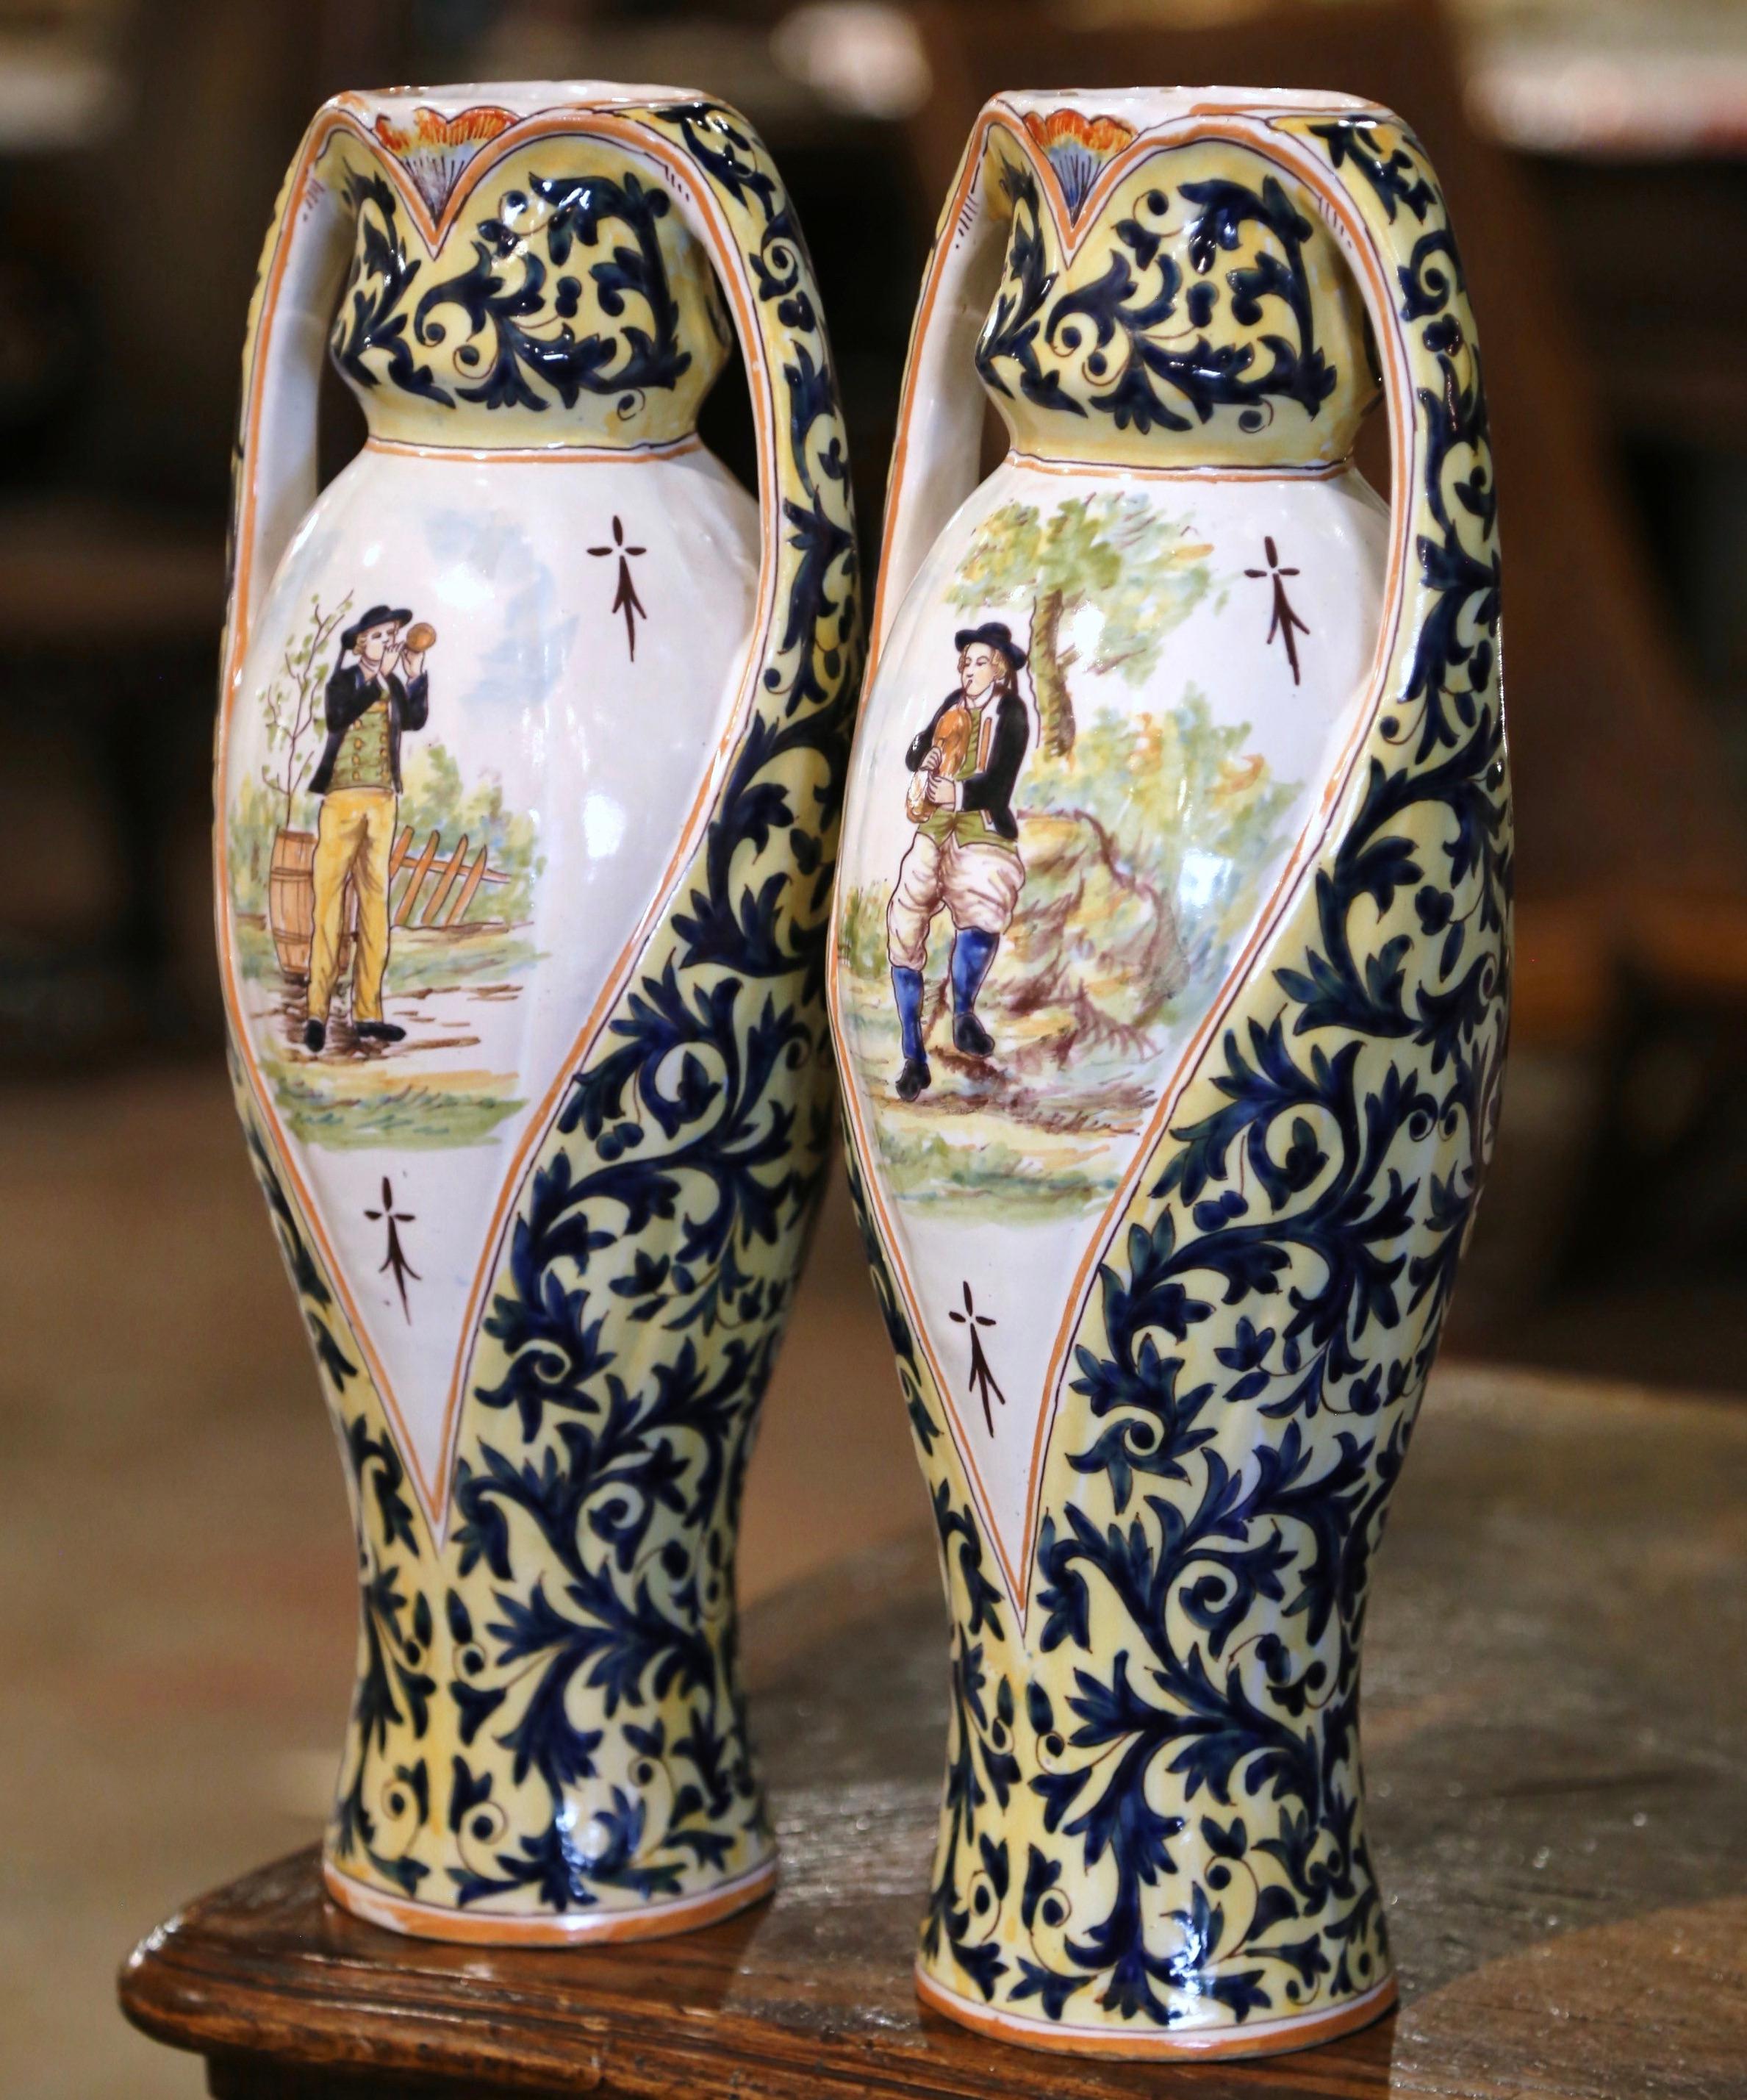 These elegant antique vases were crafted in Brittany France, circa 1940. The tall circular ceramic vases are dressed with side handles over a round neck. Each colorful vessel features hand painted Breton people in traditional clothing, embellished